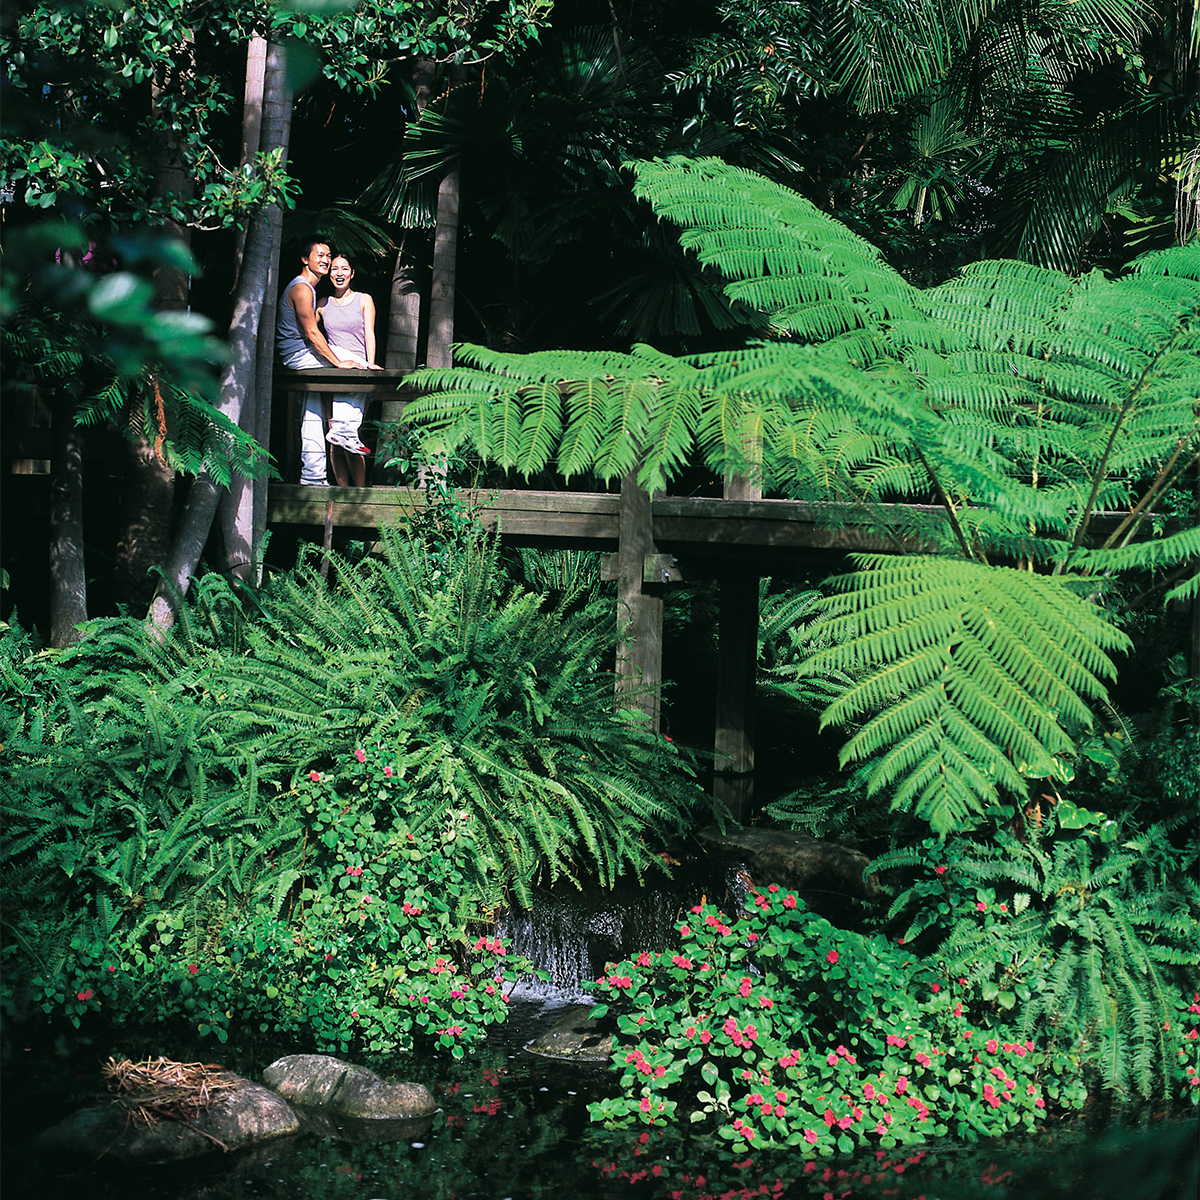 Two people standing on a bridge in the midst of a rainforest area